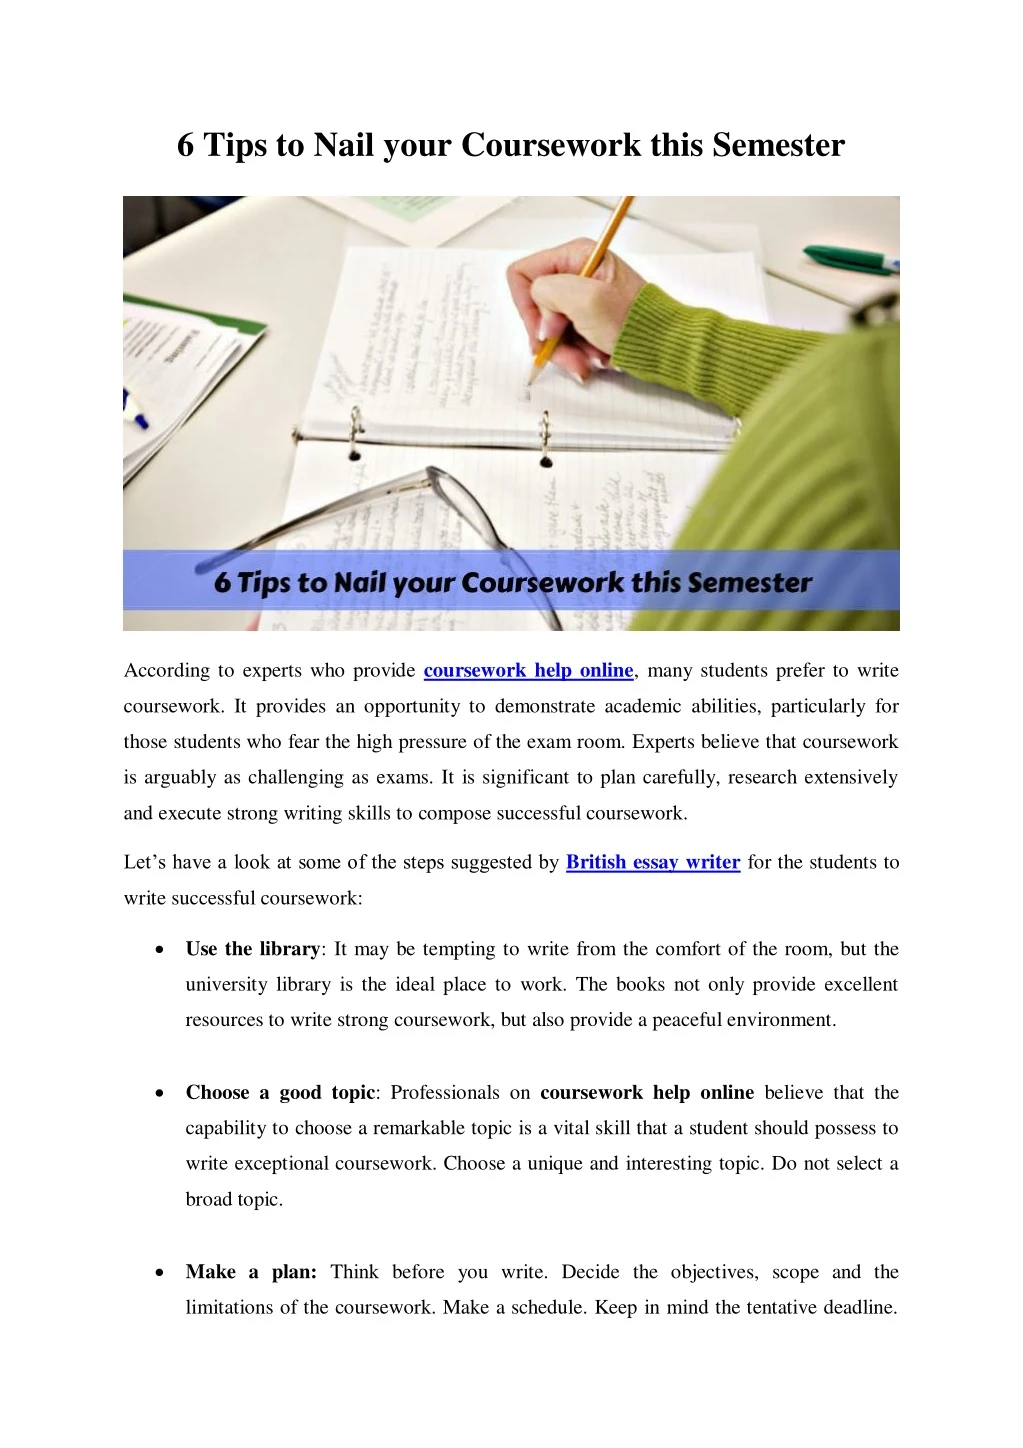 6 tips to nail your coursework this semester